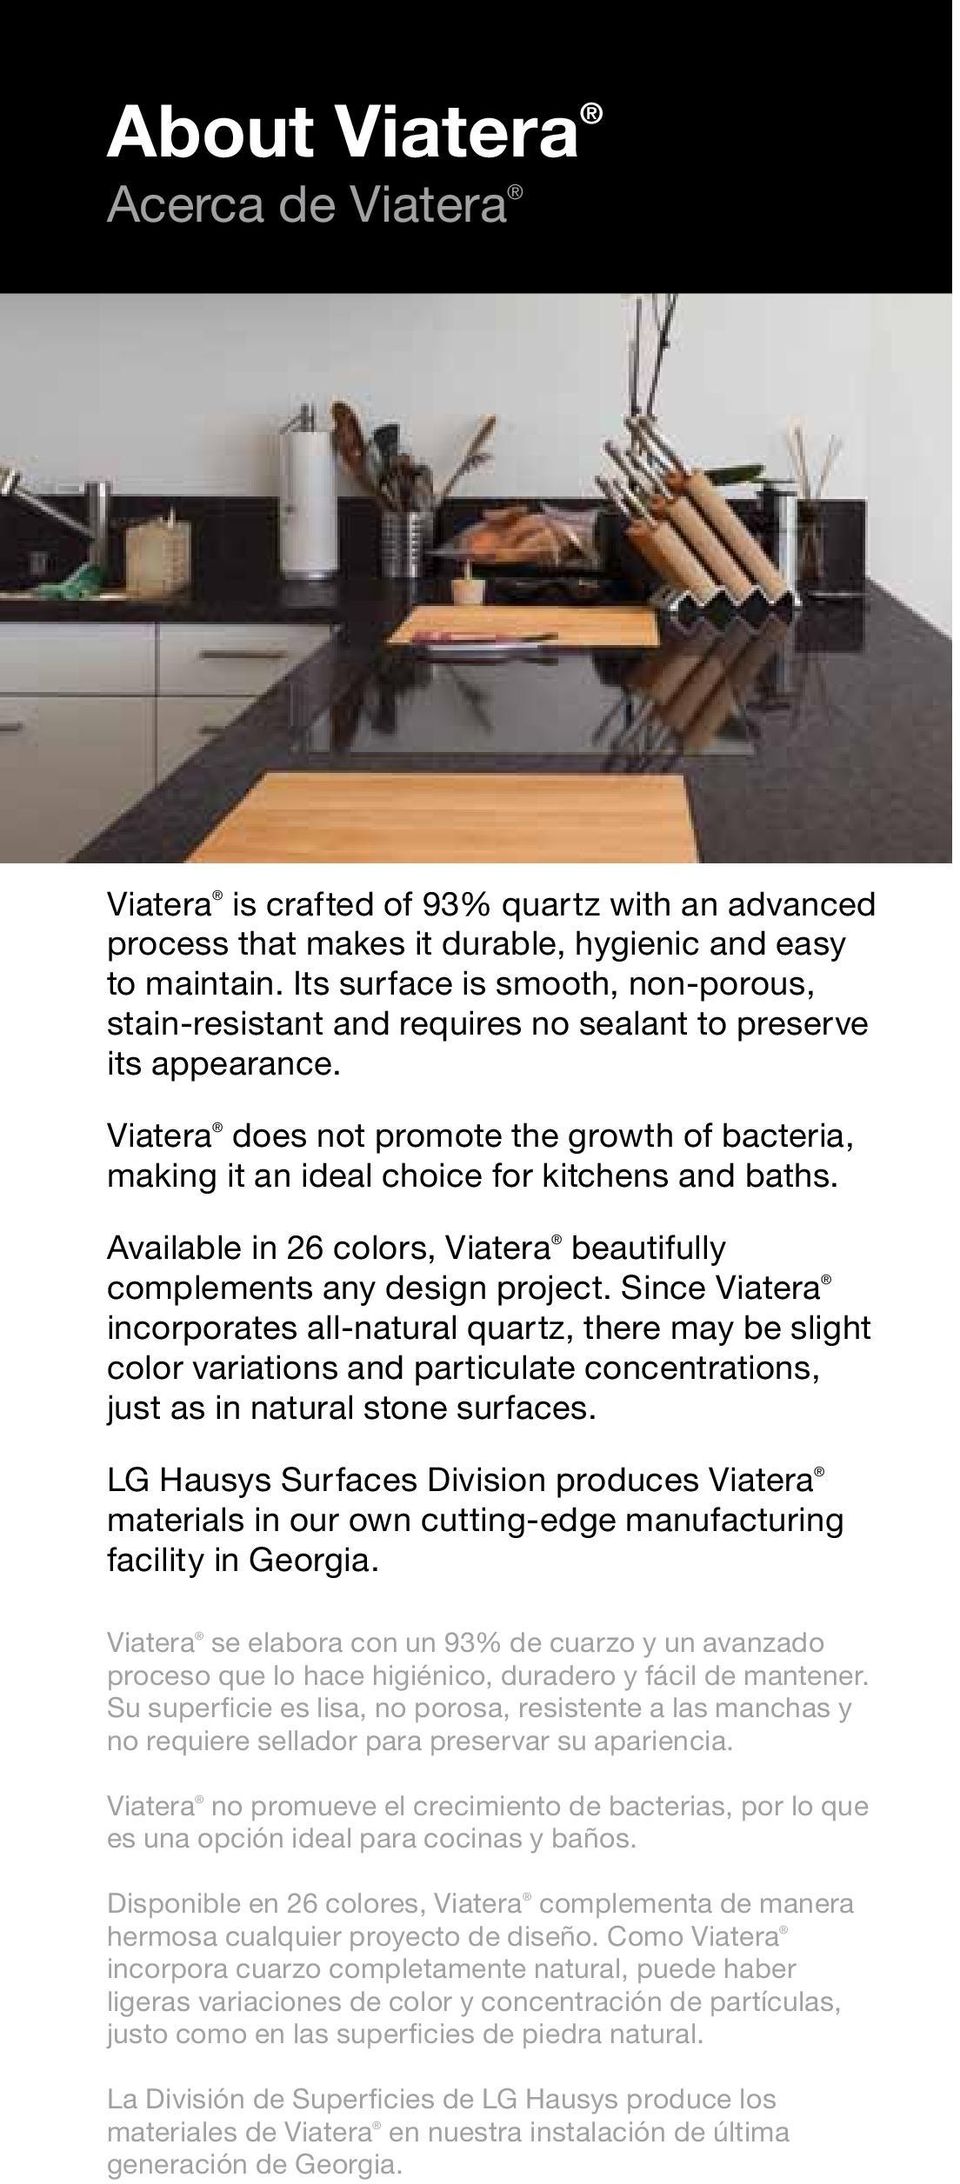 Viatera does not promote the growth of bacteria, making it an ideal choice for kitchens and baths. Available in 26 colors, Viatera beautifully complements any design project.